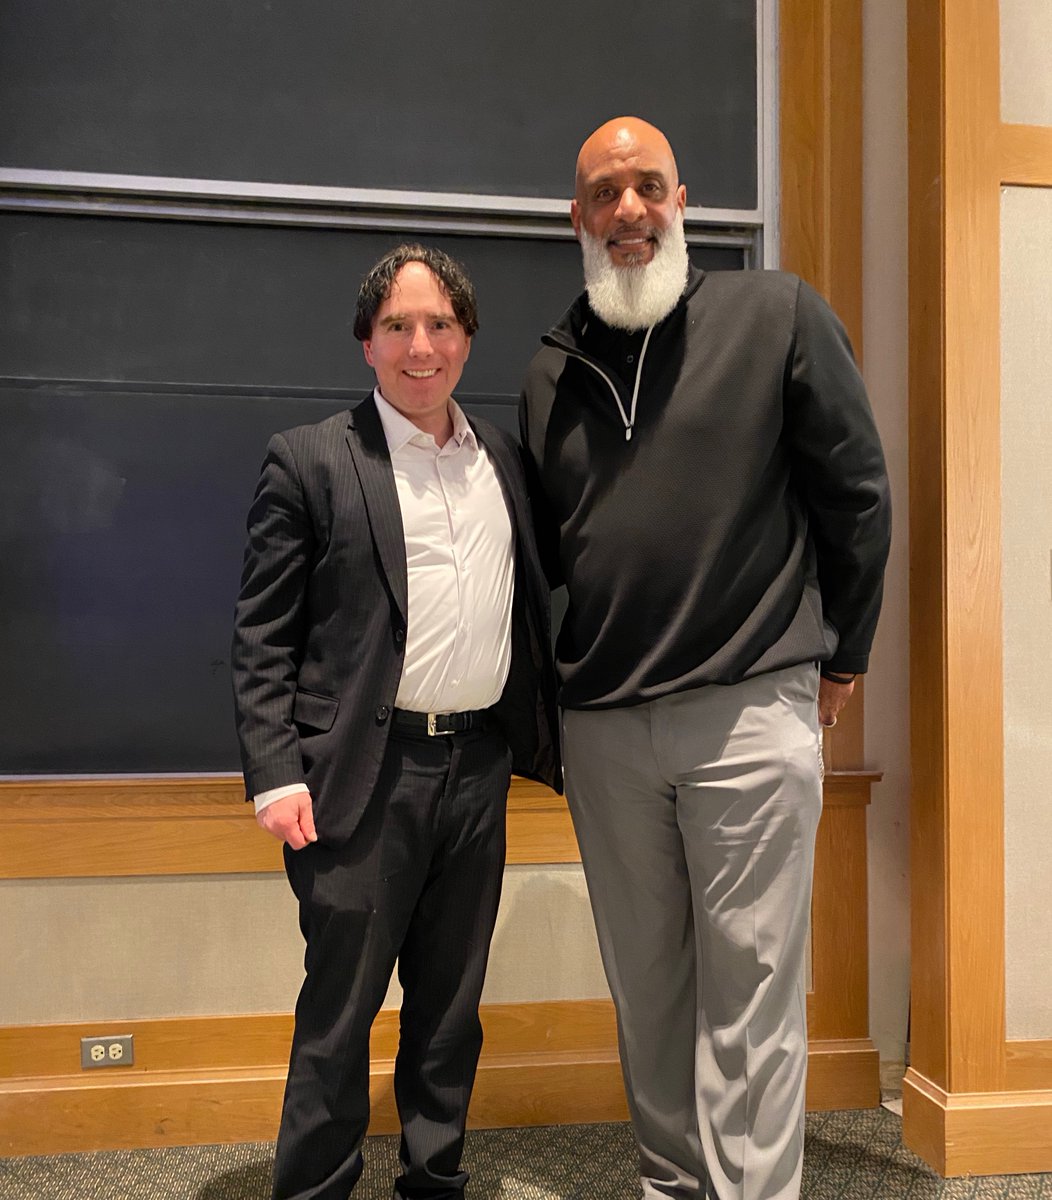 Thanks to all who turned out at Dartmouth College last night for the 'Player Unionization: History in the Making' event with @MLBPA executive director Tony Clark and me. Tony gave excellent insights on the U.S. labor movement and unions. I can also confirm he is 6'8, as listed!